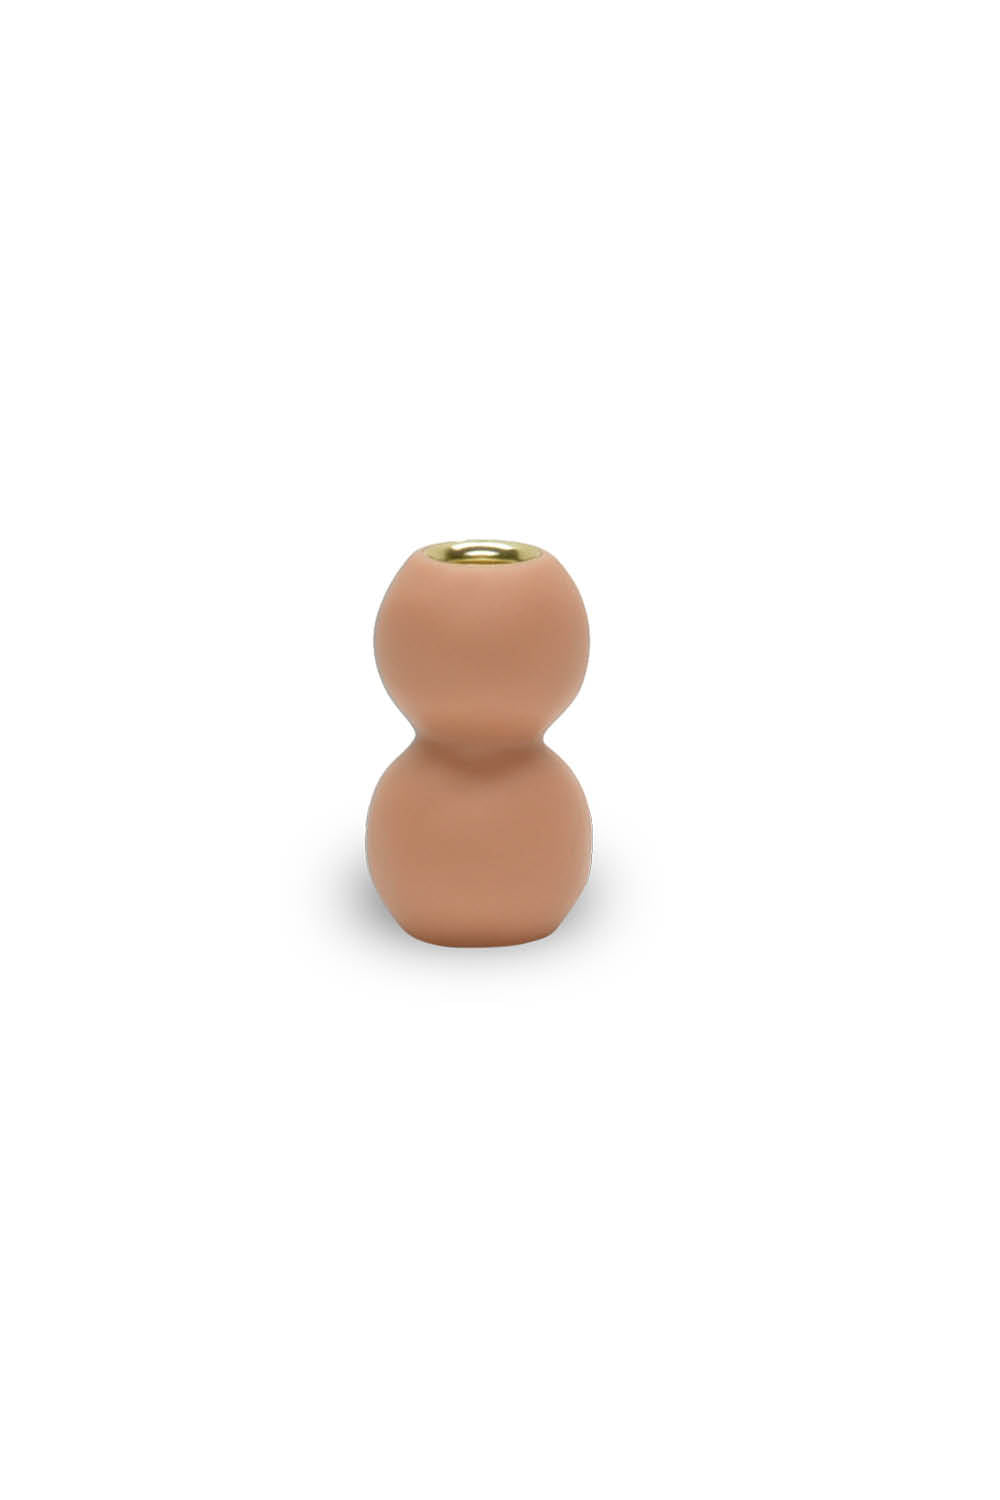 BUBBLE Two Bubble Small Candleholder in Nude